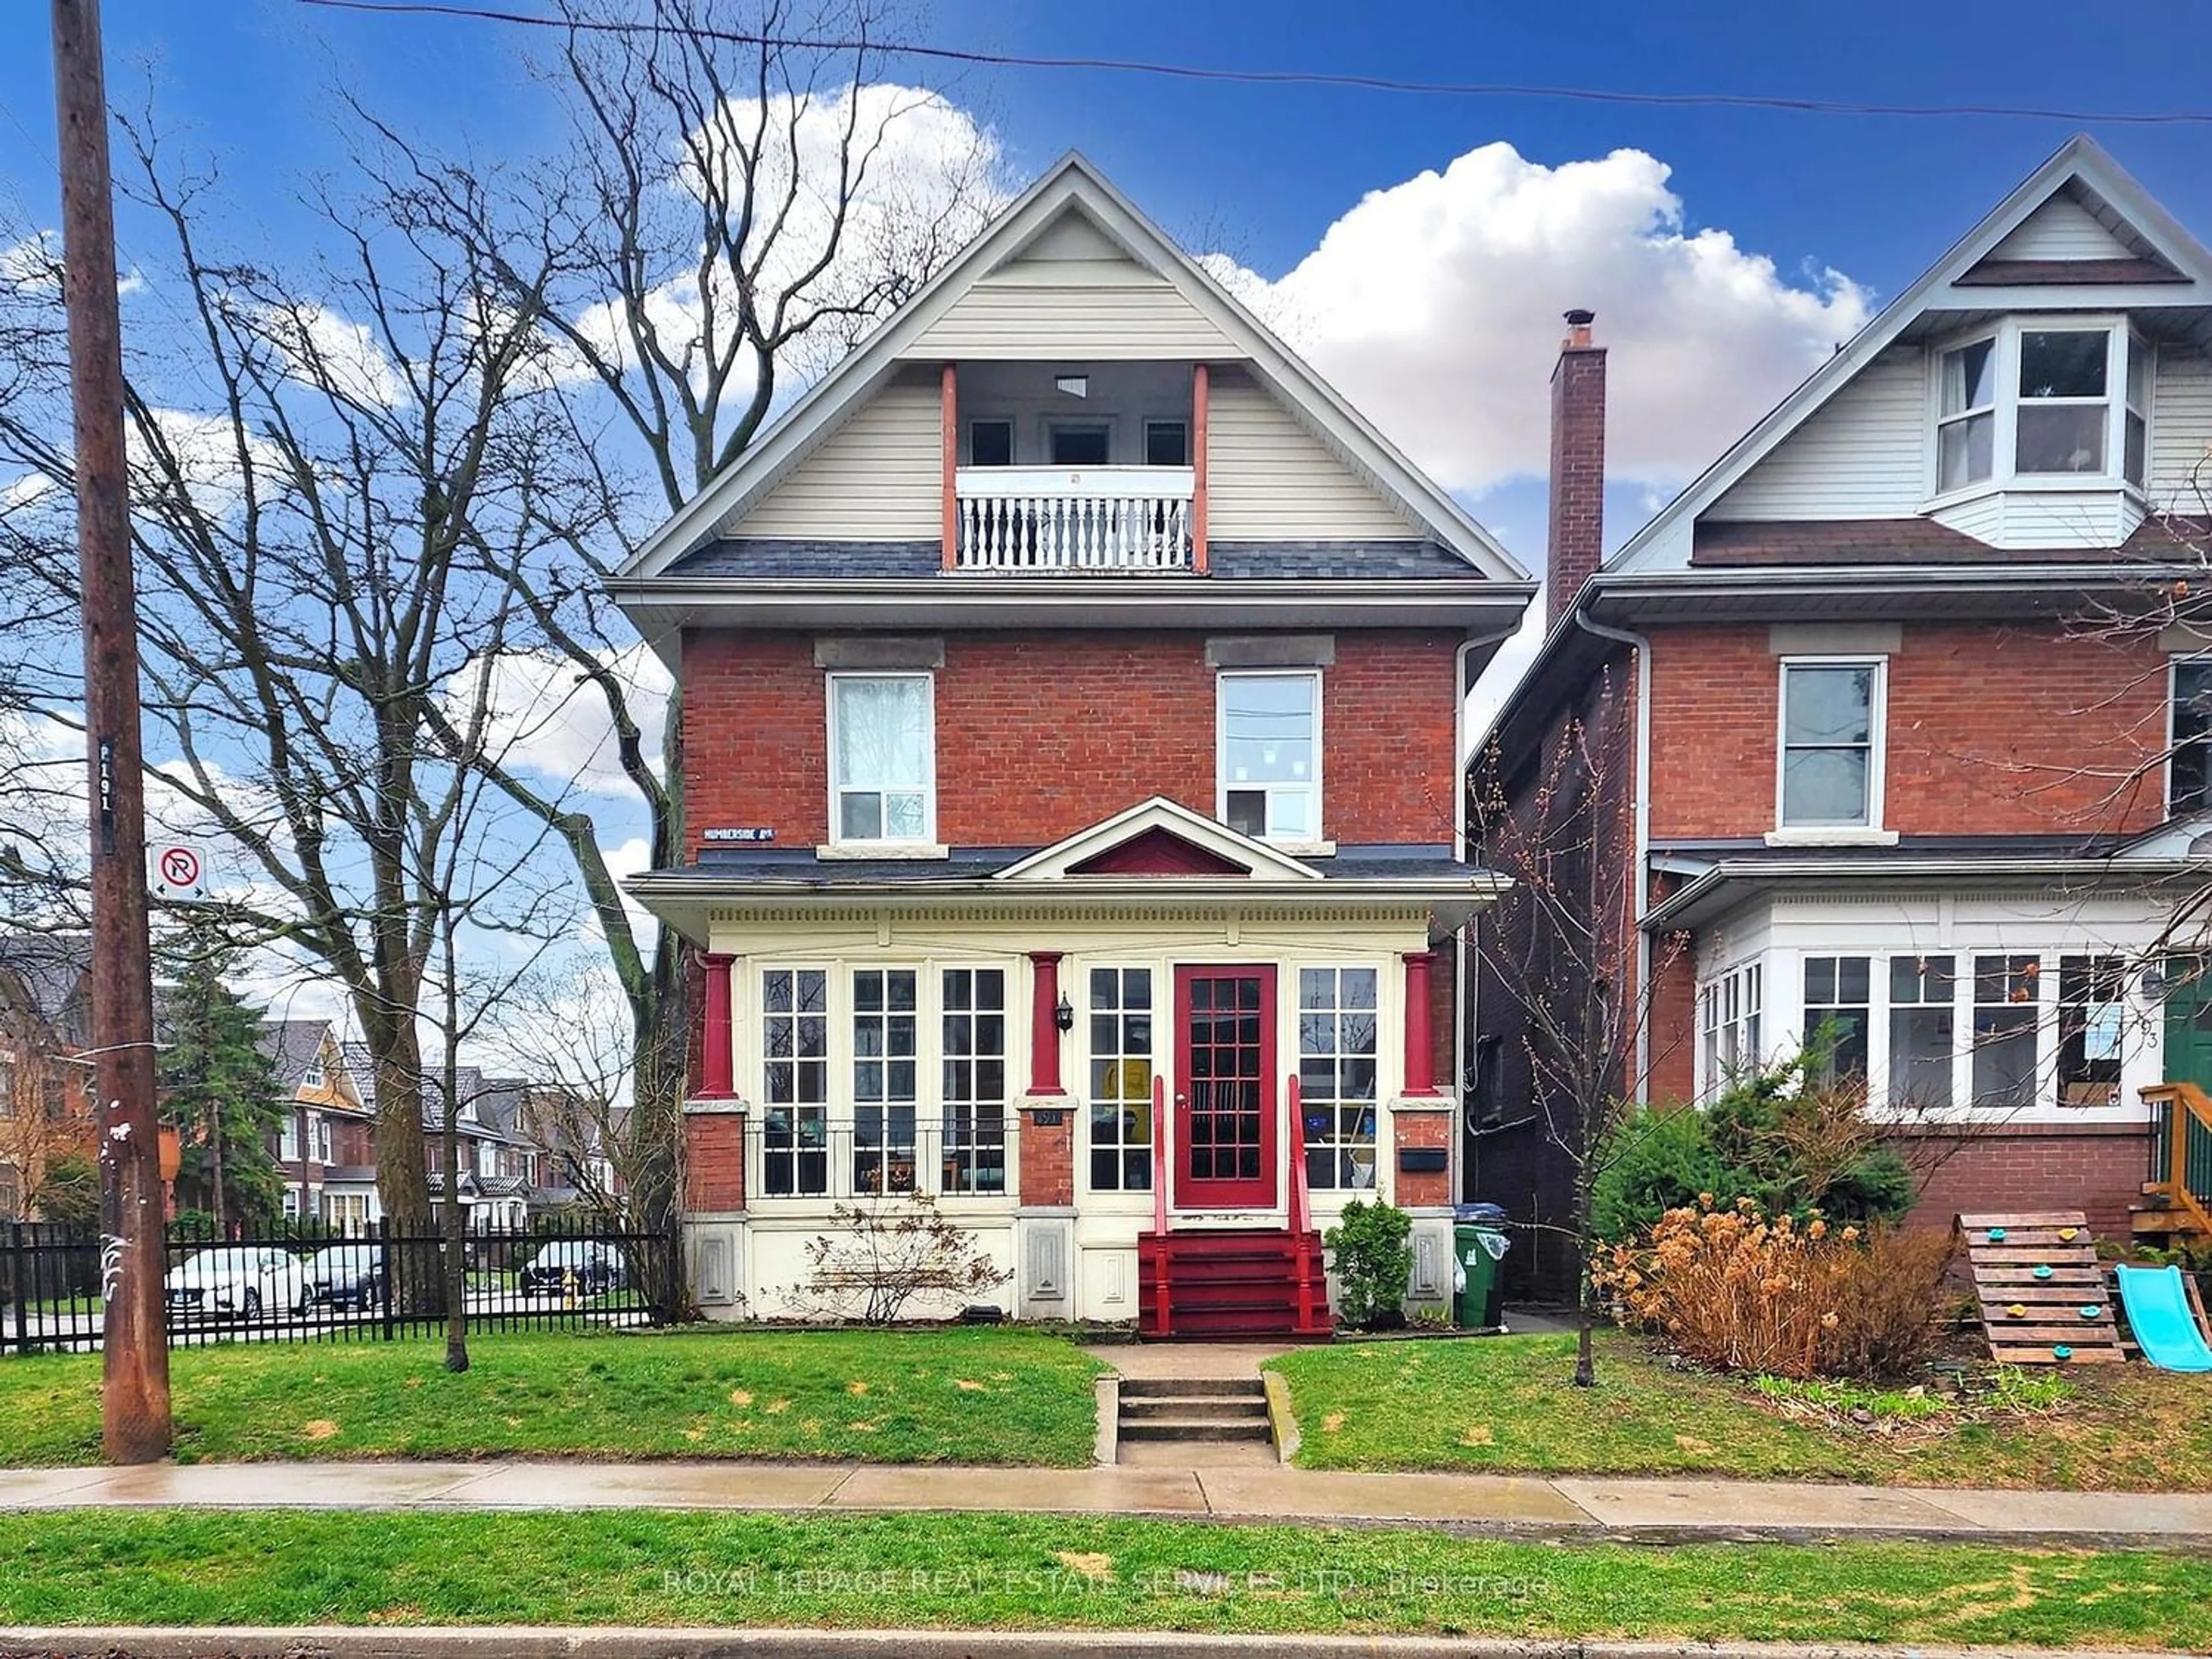 Home with brick exterior material for 191 Humberside Ave, Toronto Ontario M6P 1K7